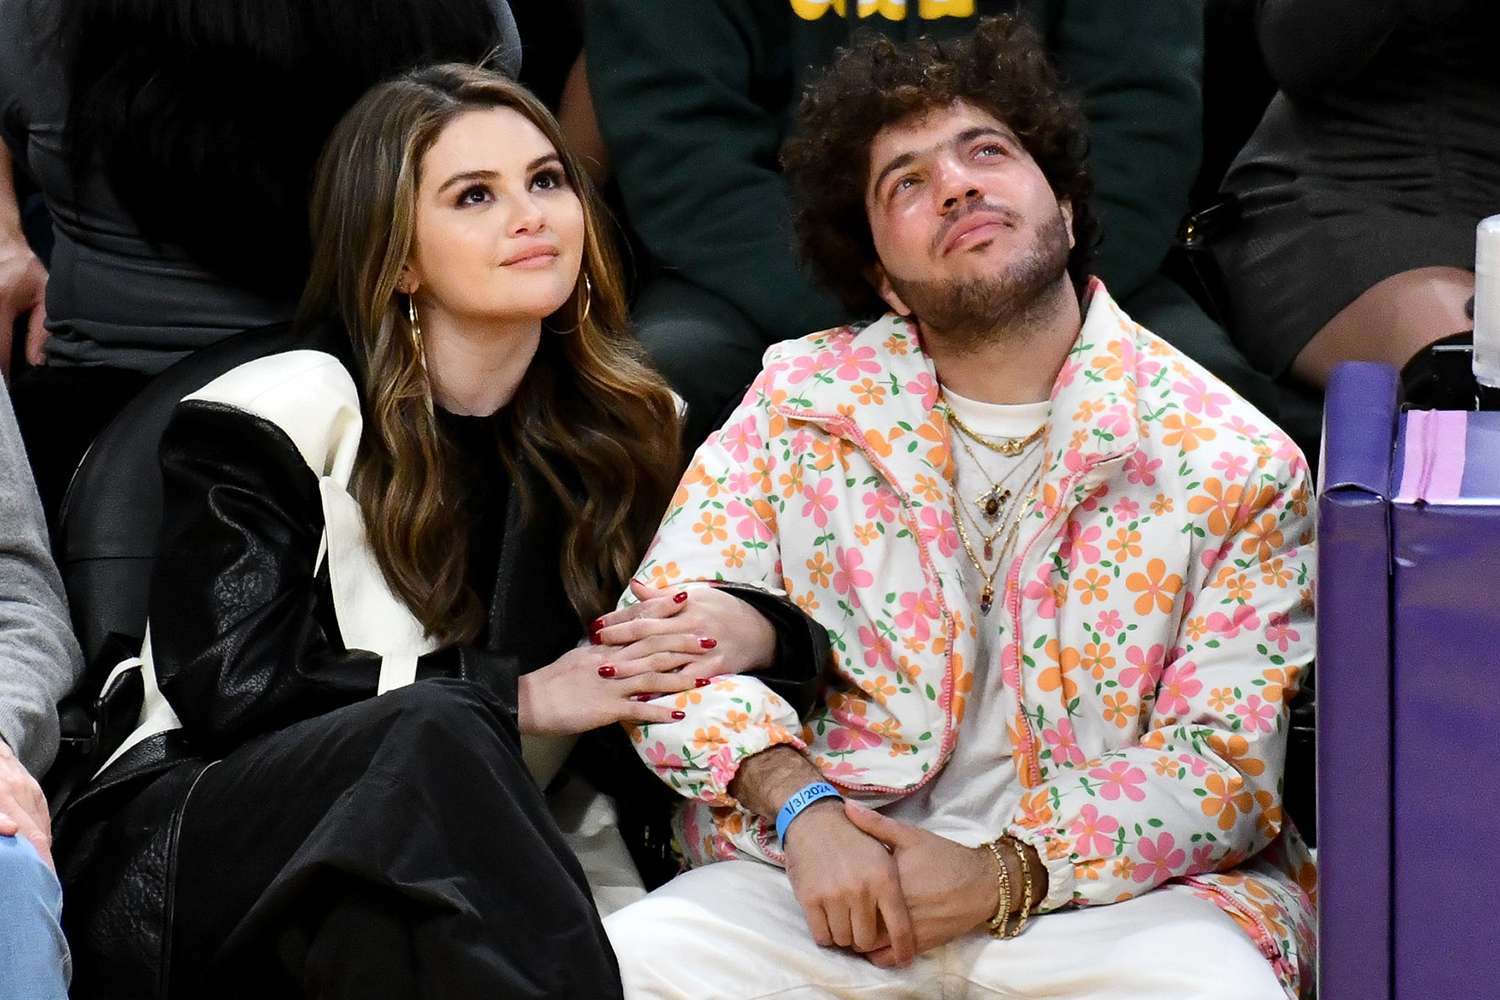 Benny Blanco Says He 'Was the Last One to Know' He and Selena Gomez Were in Love